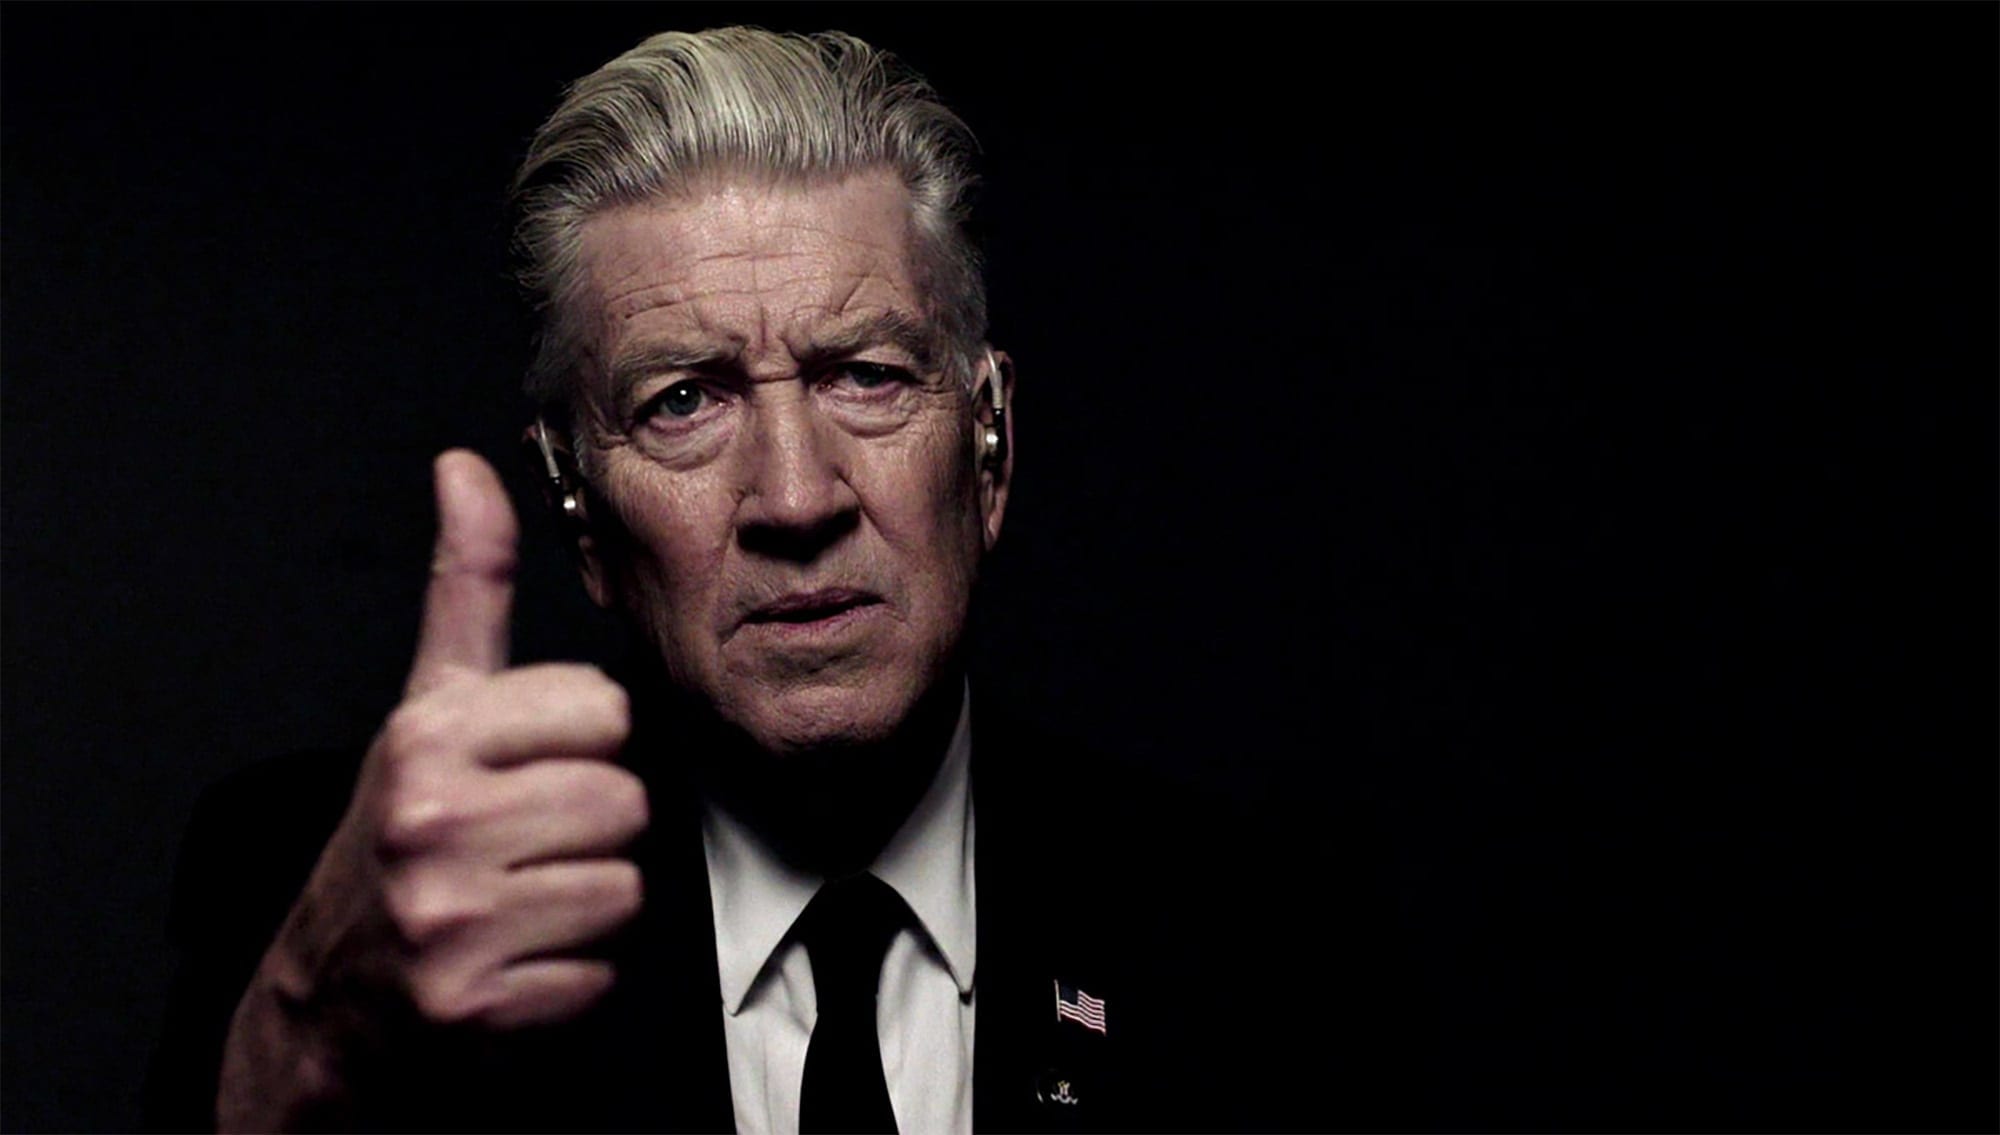 We're tempted to storm the Emmy offices screaming “Got a light?” if they fail to acknowledge David Lynch for 'Twin Peaks: The Return'.